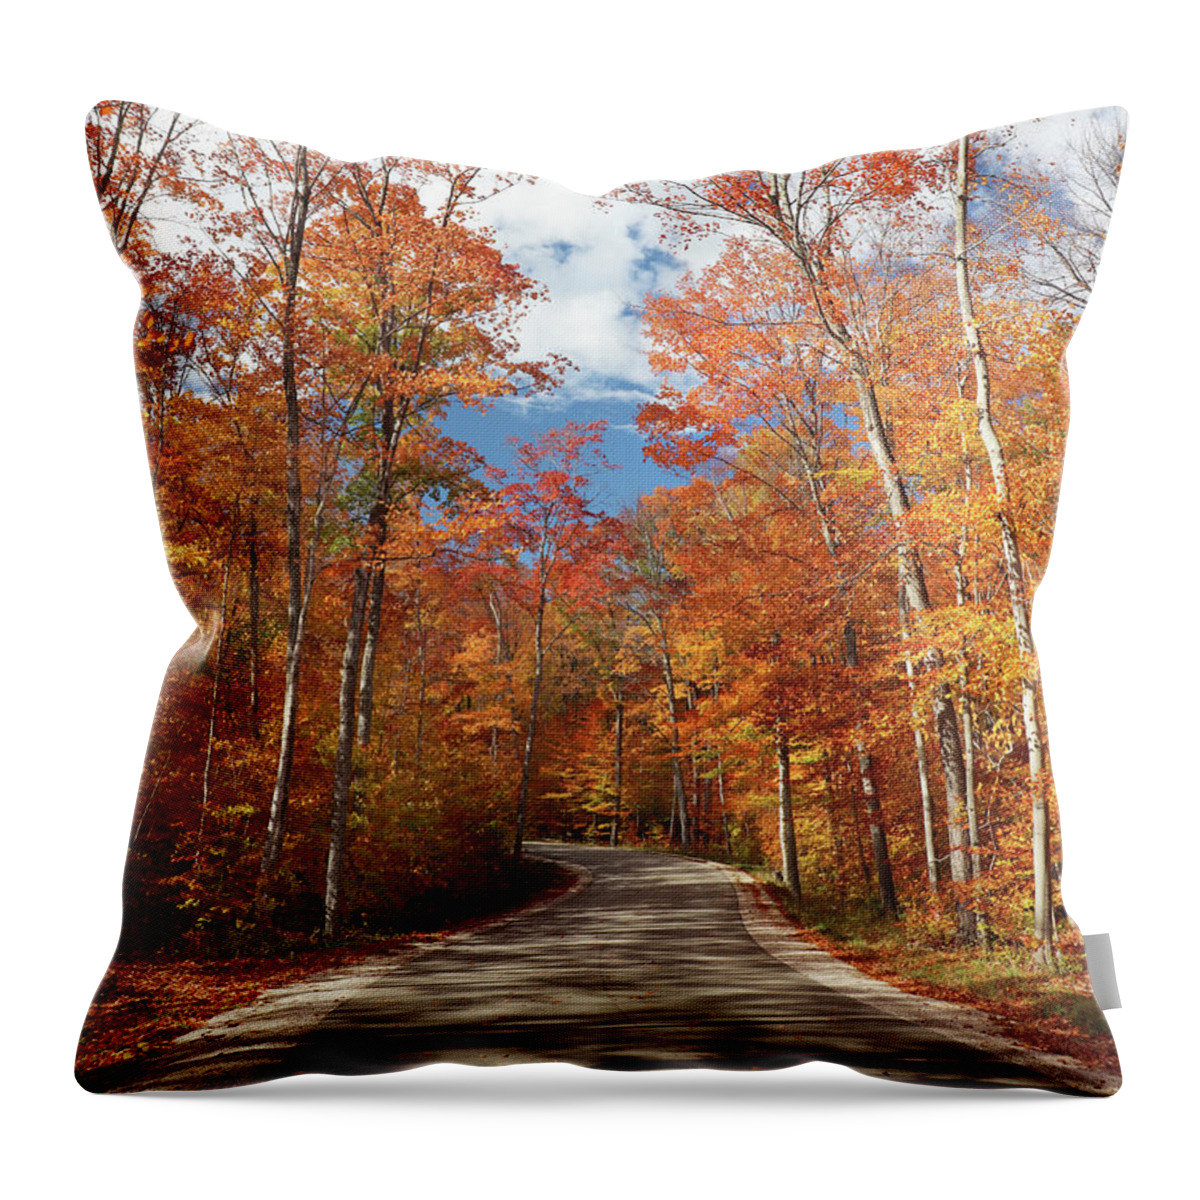 Fall Throw Pillow featuring the photograph Winding Through the Fall Colors by David T Wilkinson